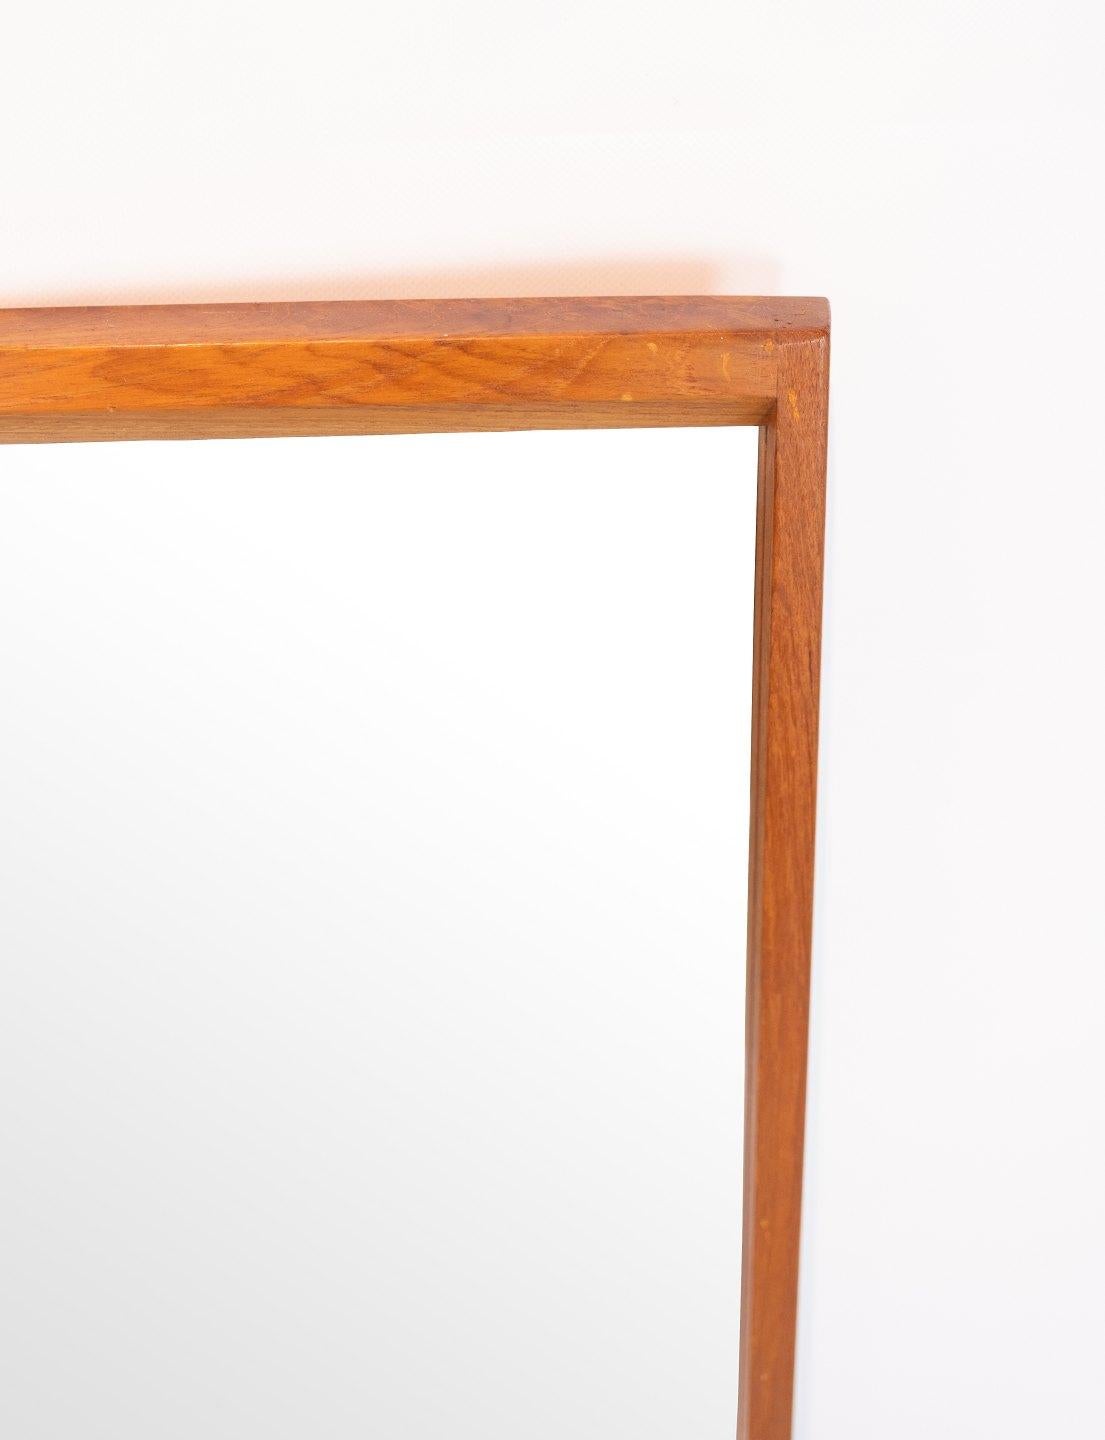 The tall mirror frame crafted in oak showcases the timeless elegance of Danish design, attributed to the renowned designer Aksel Kjærsgaard during the 1960s.

Aksel Kjærsgaard, a prominent figure in mid-century Danish design, was celebrated for his